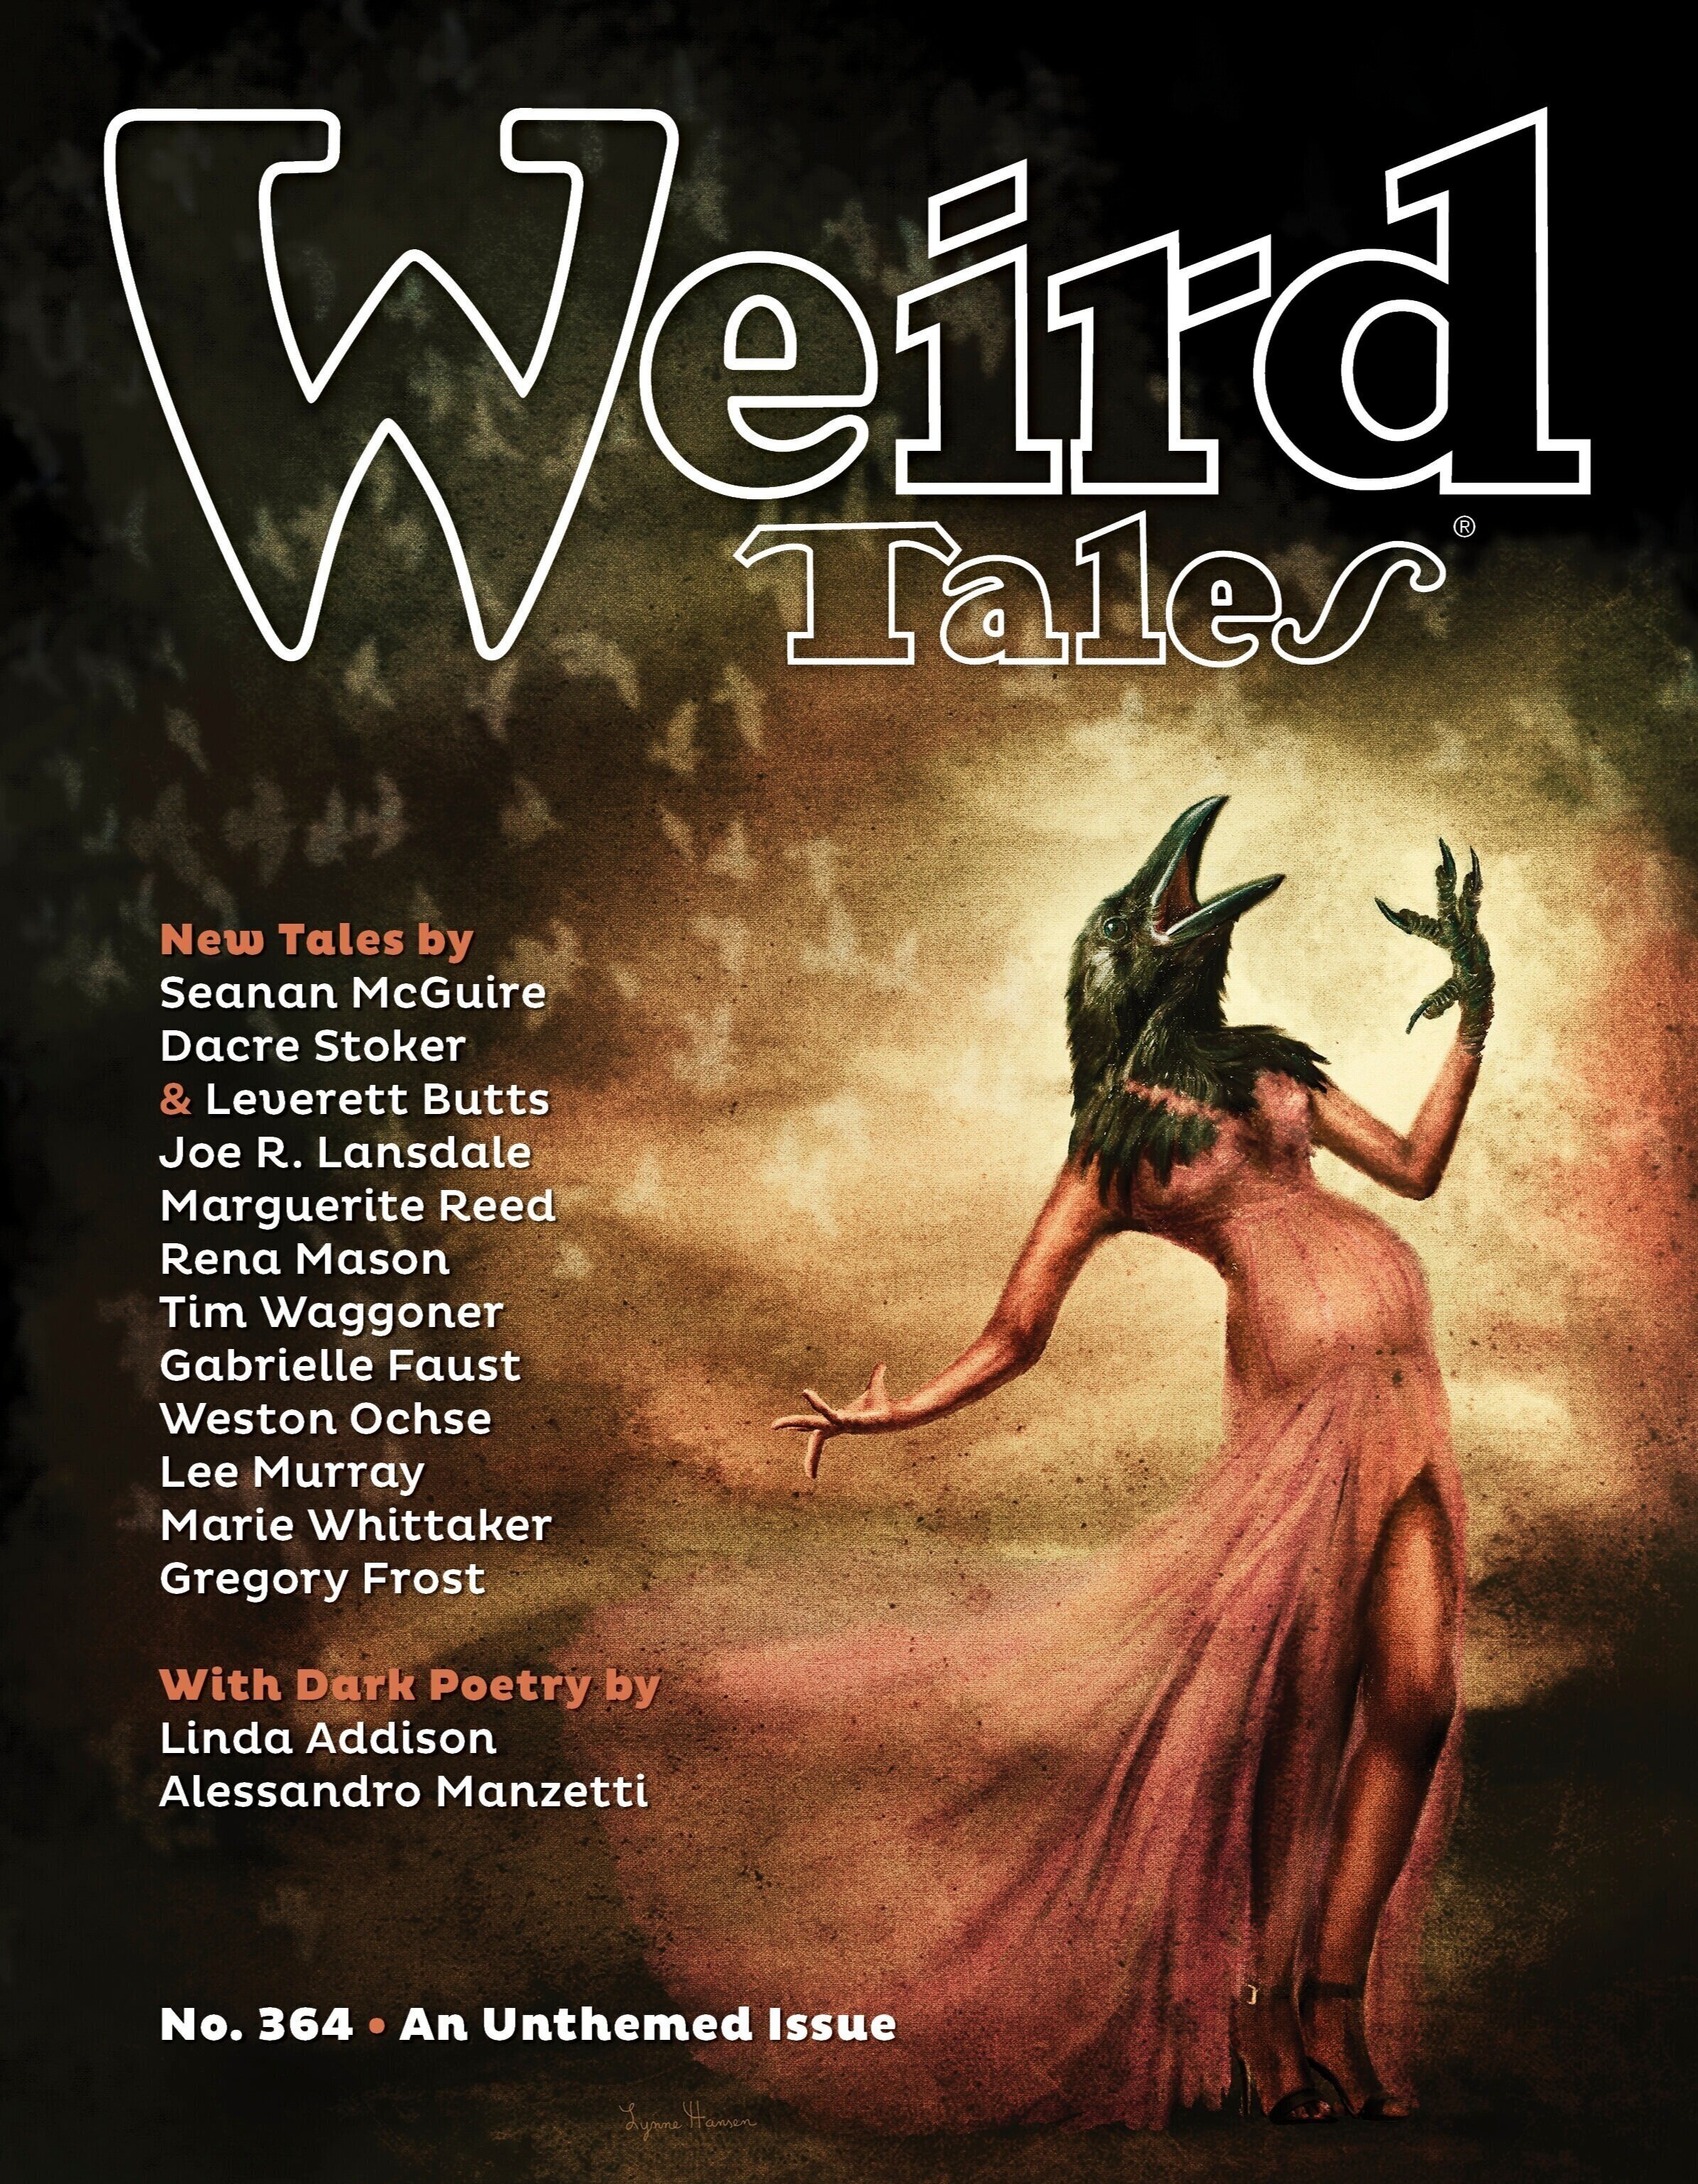 Weird Tales Magazine: A Complete List of Issues and History